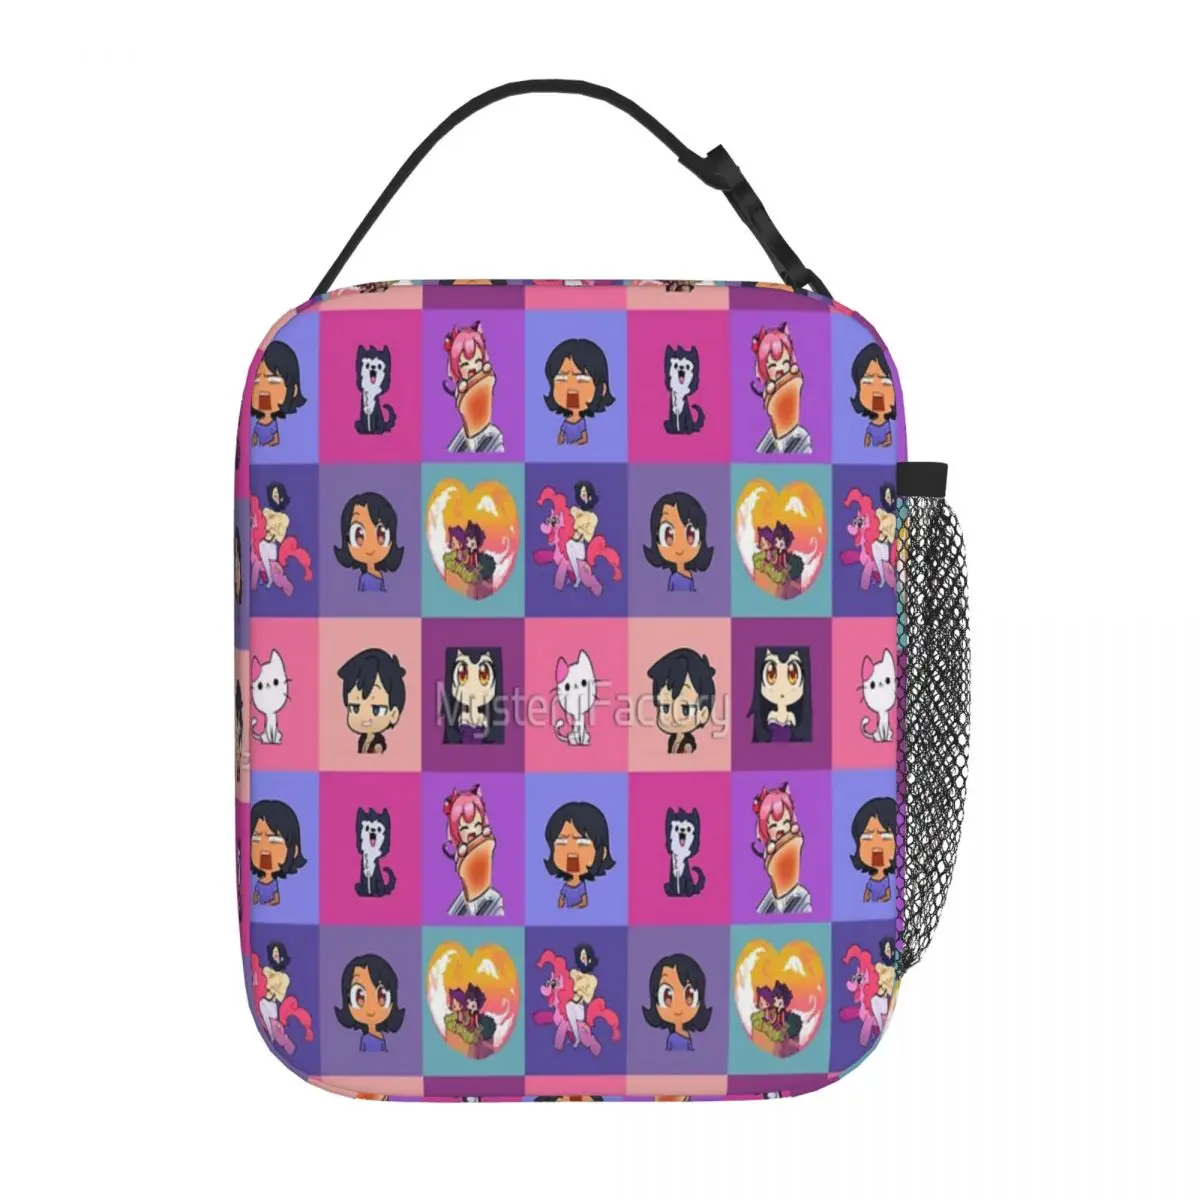 https://ae01.alicdn.com/kf/S3c27f8fe394a47f195883e0802933feae/Aphmau-Collection-Mosaik-Aaron-Zane-Kawaii-Chan-Lunch-Tote-Lunchbox-Lunch-Box-Kids-Thermo-Cooler-Bag.jpg